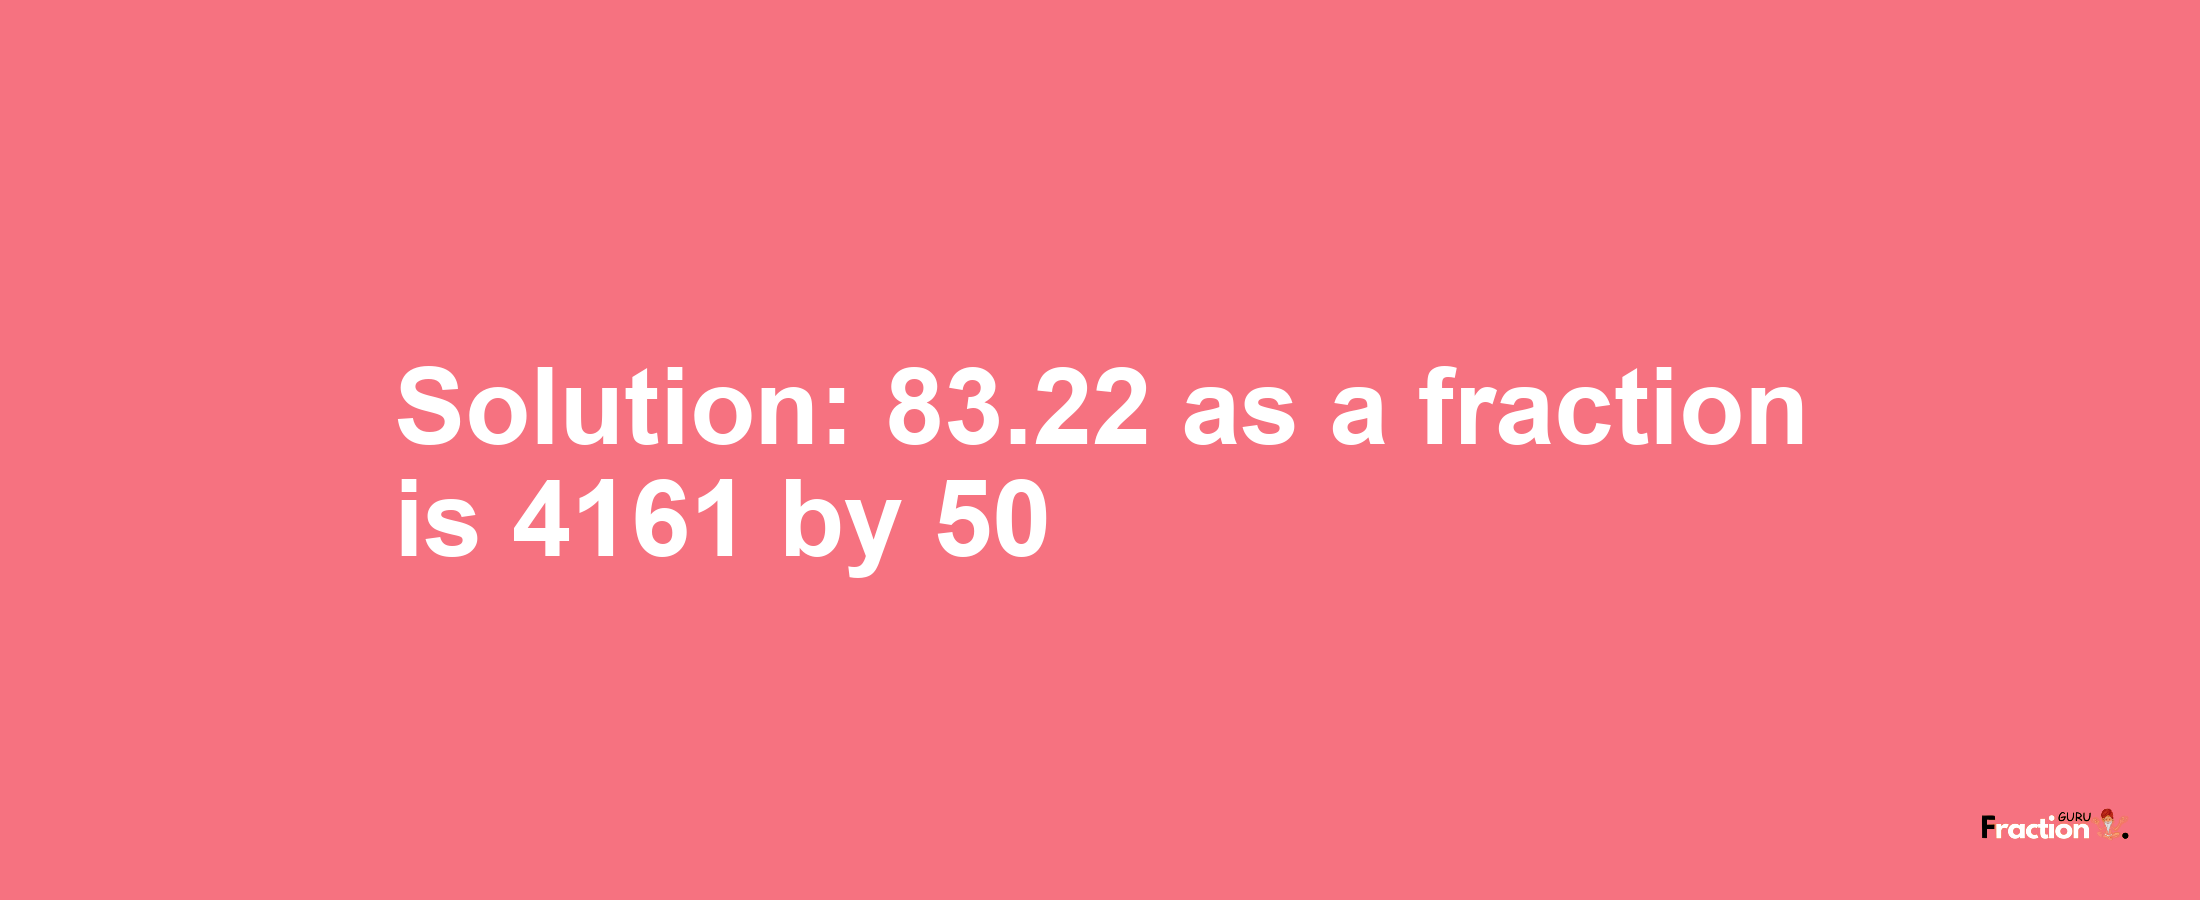 Solution:83.22 as a fraction is 4161/50